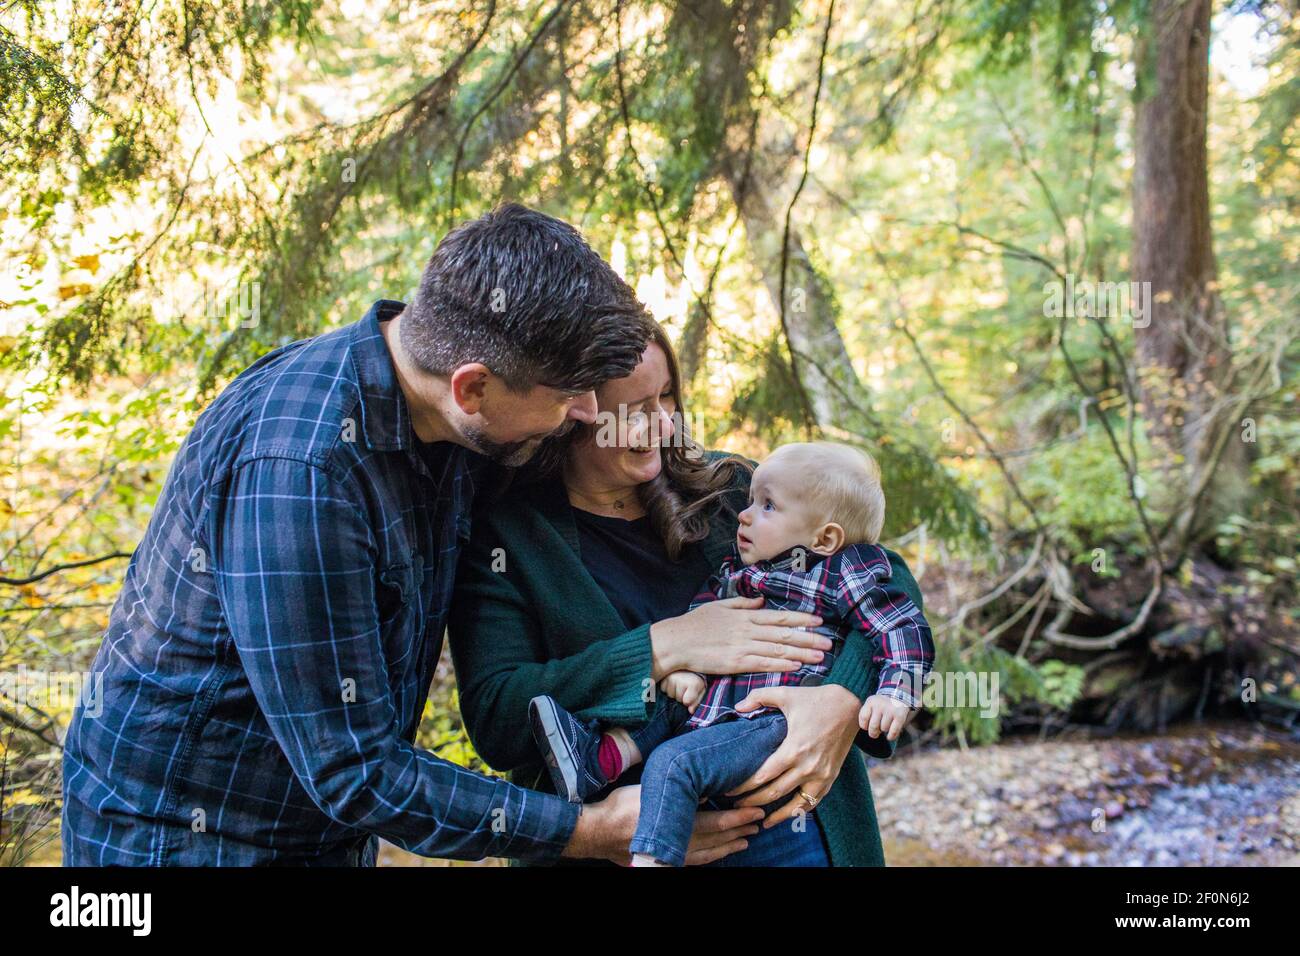 Mother and father bonding with their son outdoors. Stock Photo